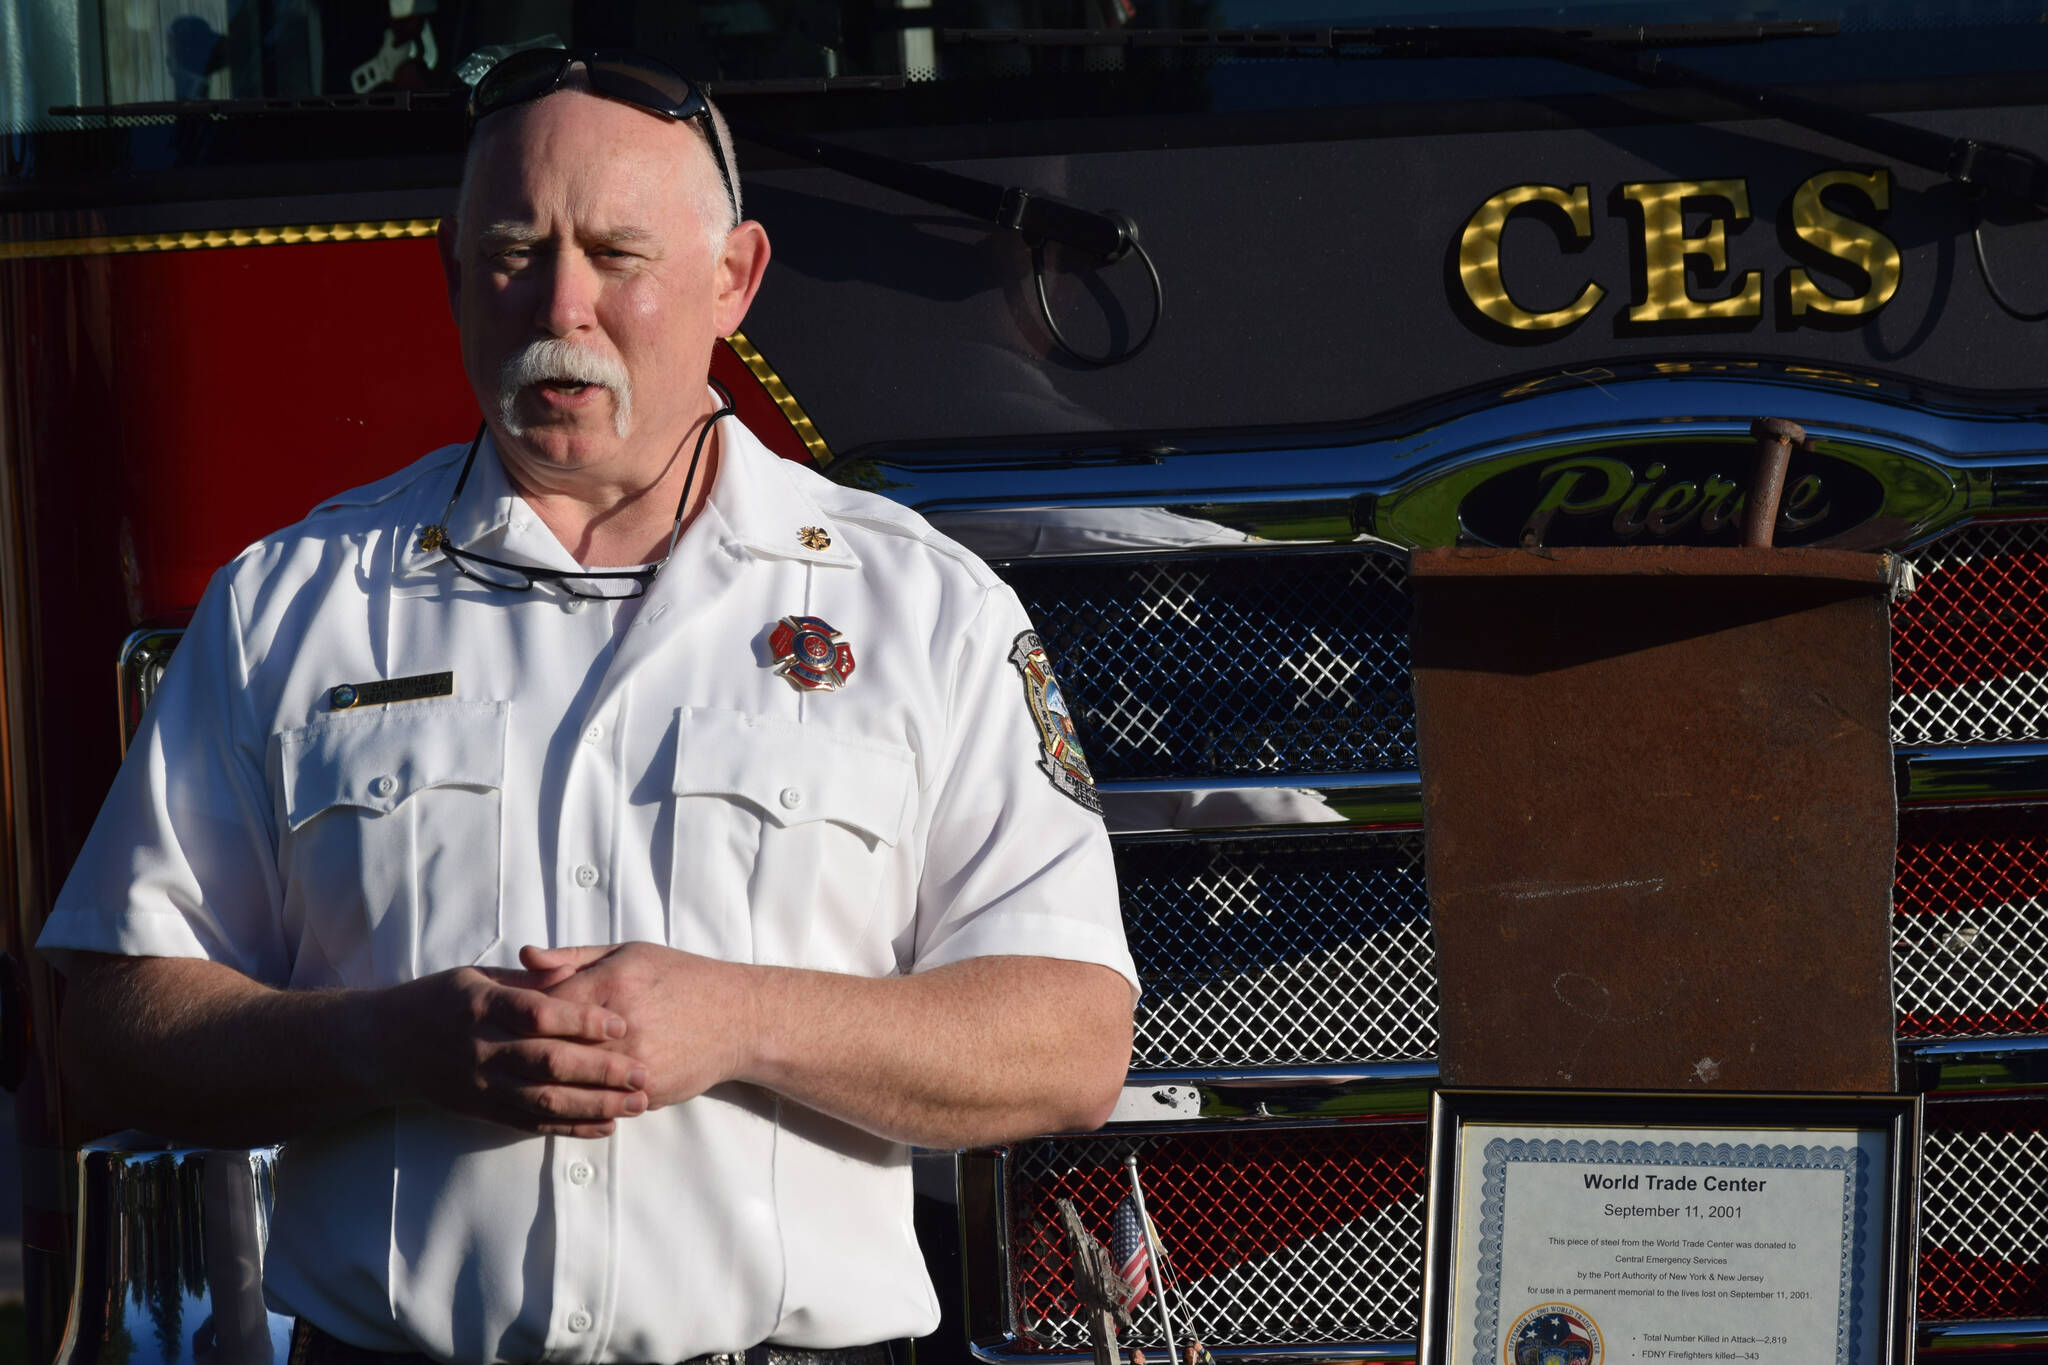 Deputy Chief Dan Grimes speaks at Central Emergency Services in Soldotna during the 20th memorial service of the 9/11 terrorist attacks on Saturday, Sept. 11, 2021. (Camille Botello/Peninsula Clarion)